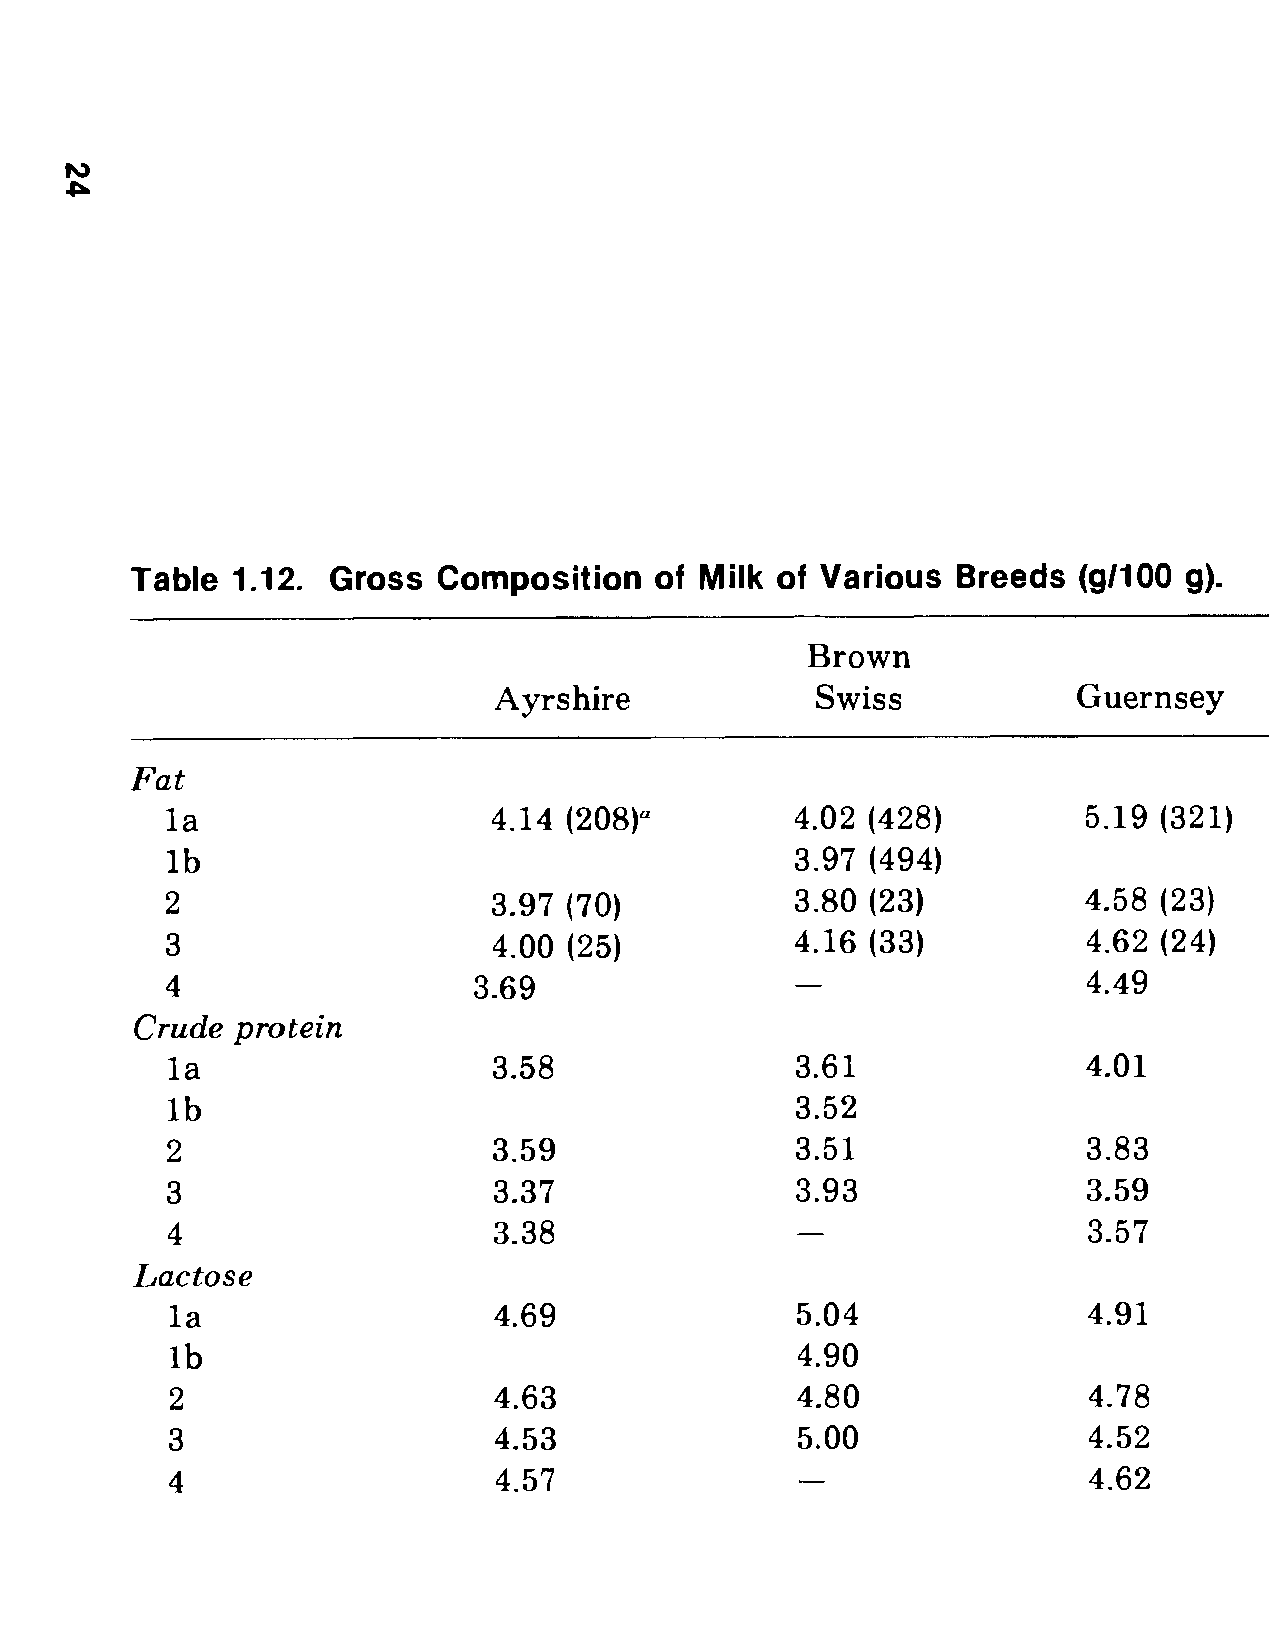 Table 1.12. Gross Composition of Milk of Various Breeds (g/100 g).